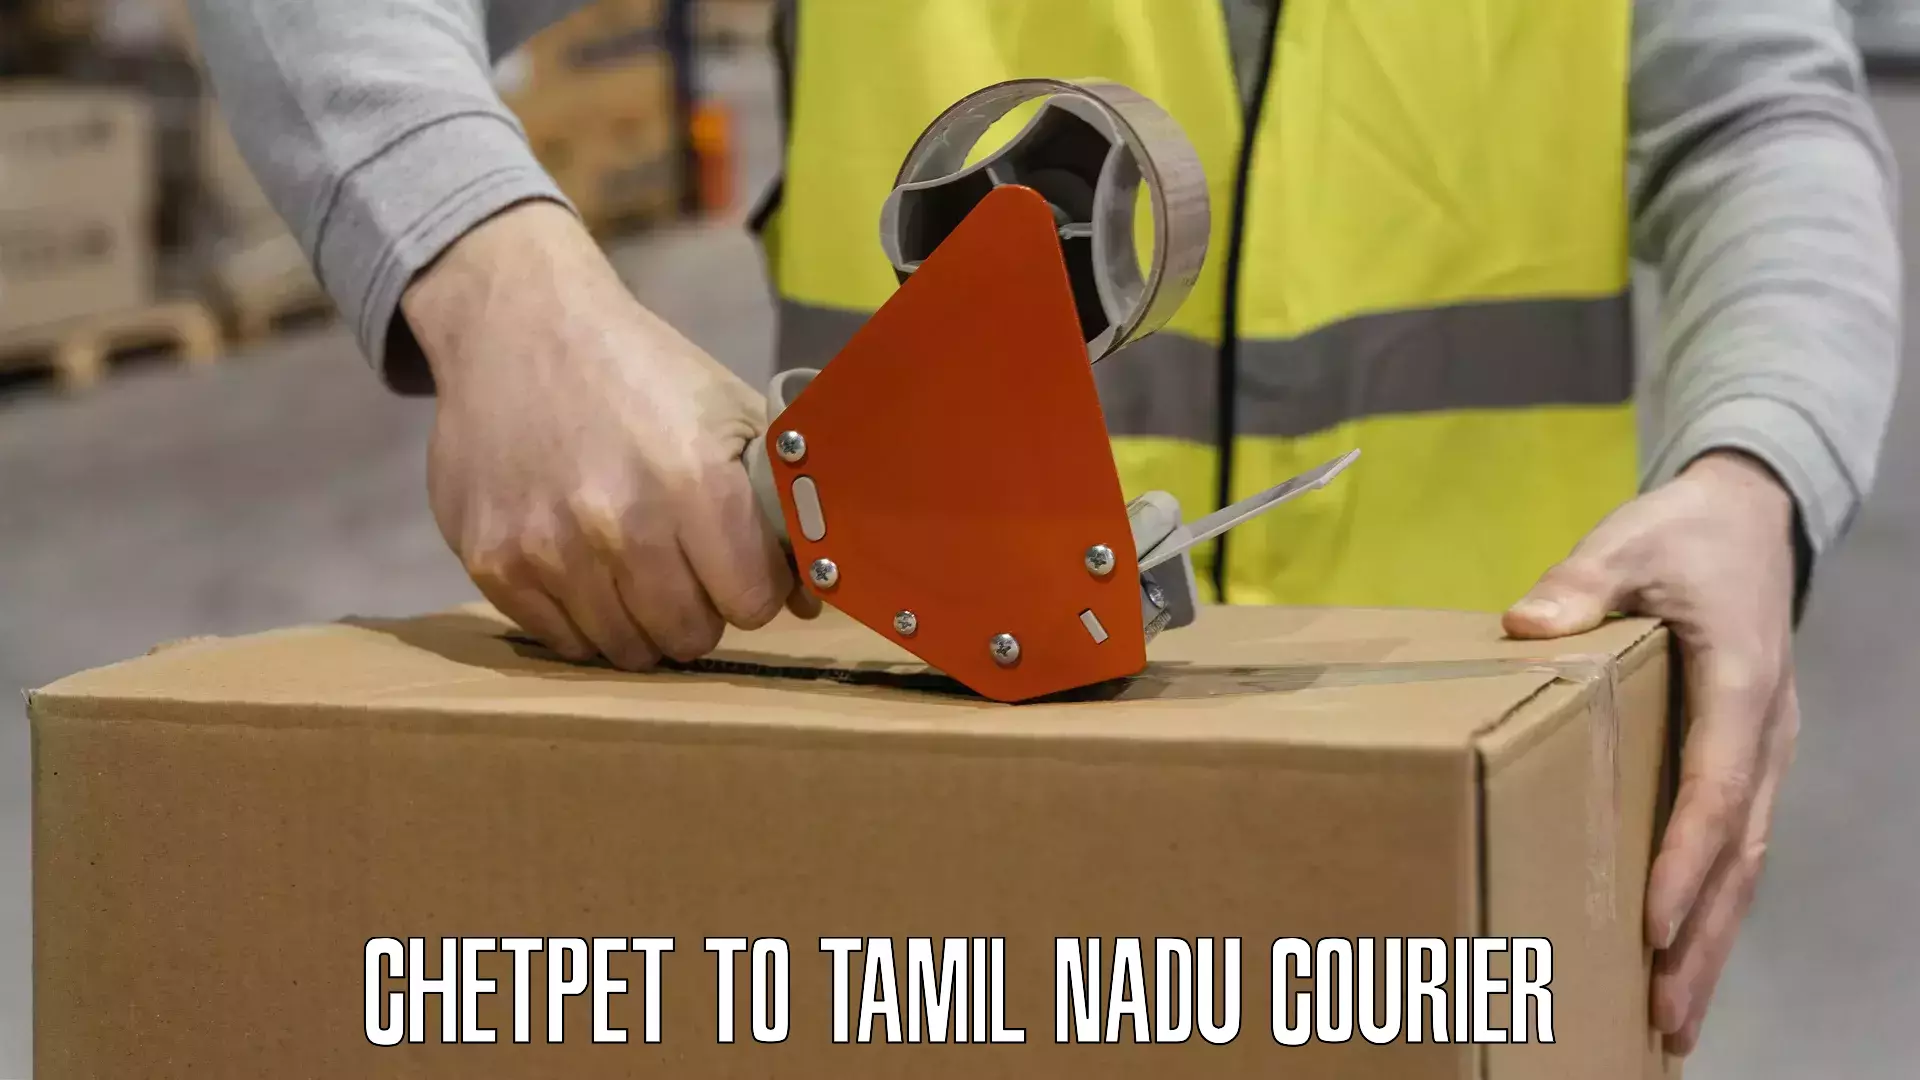 Customer-friendly courier services Chetpet to Tamil Nadu